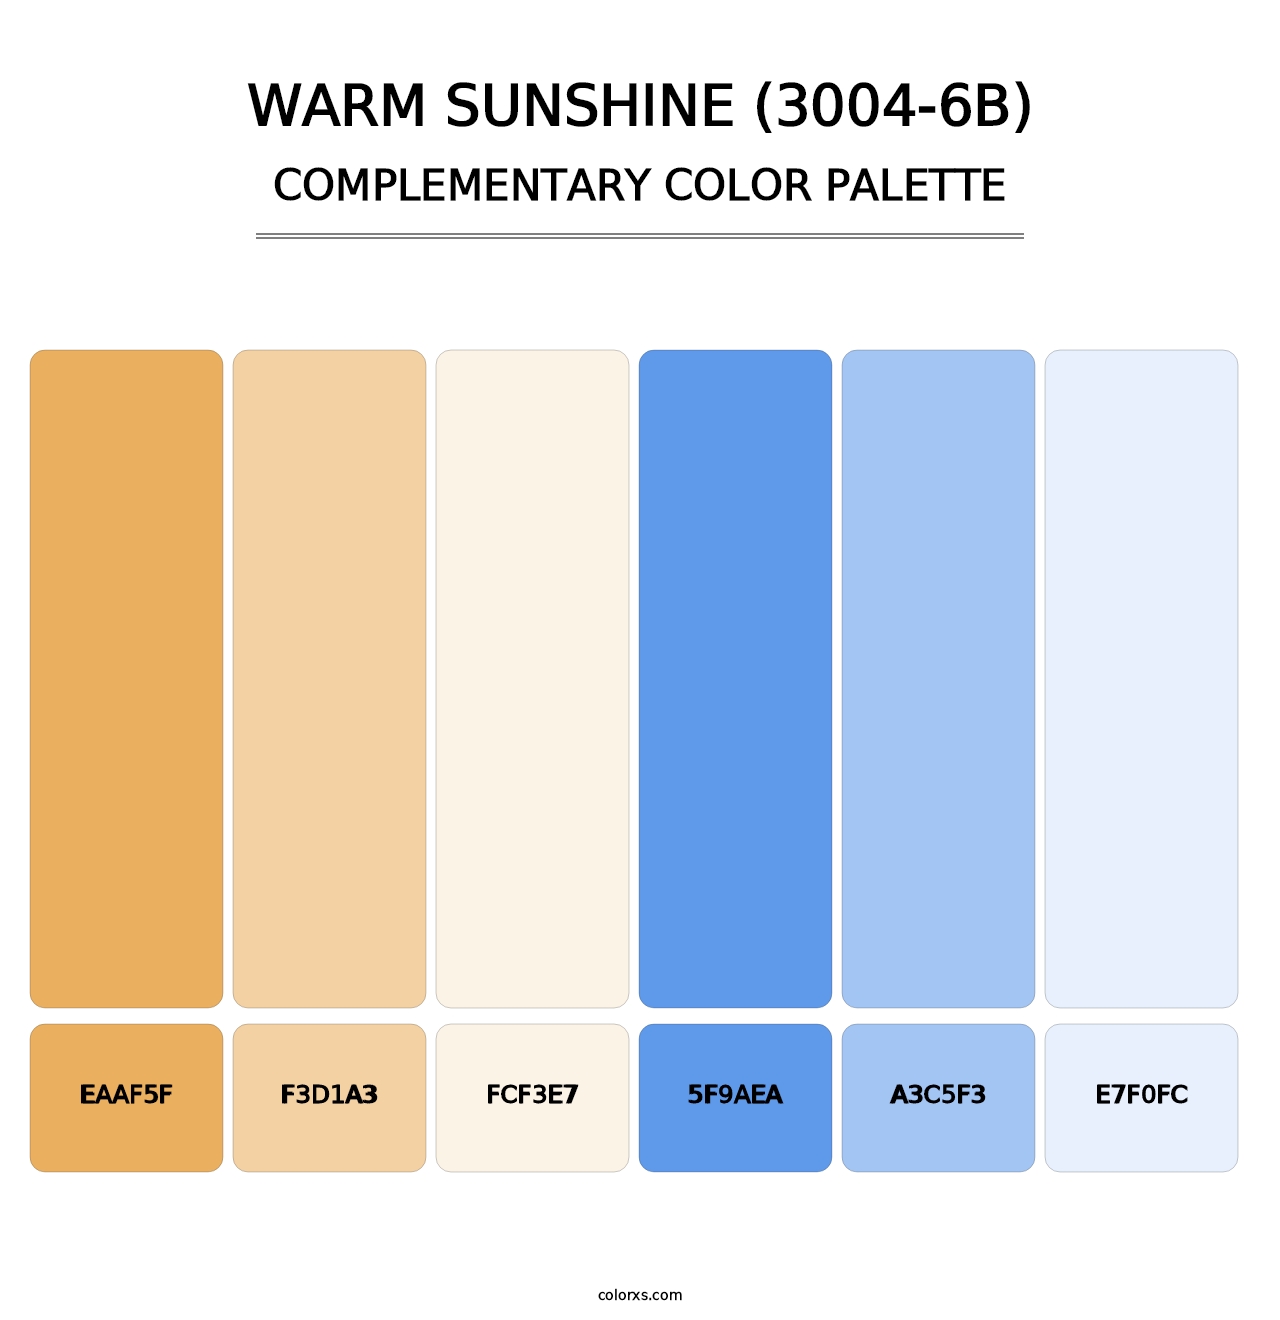 Warm Sunshine (3004-6B) - Complementary Color Palette